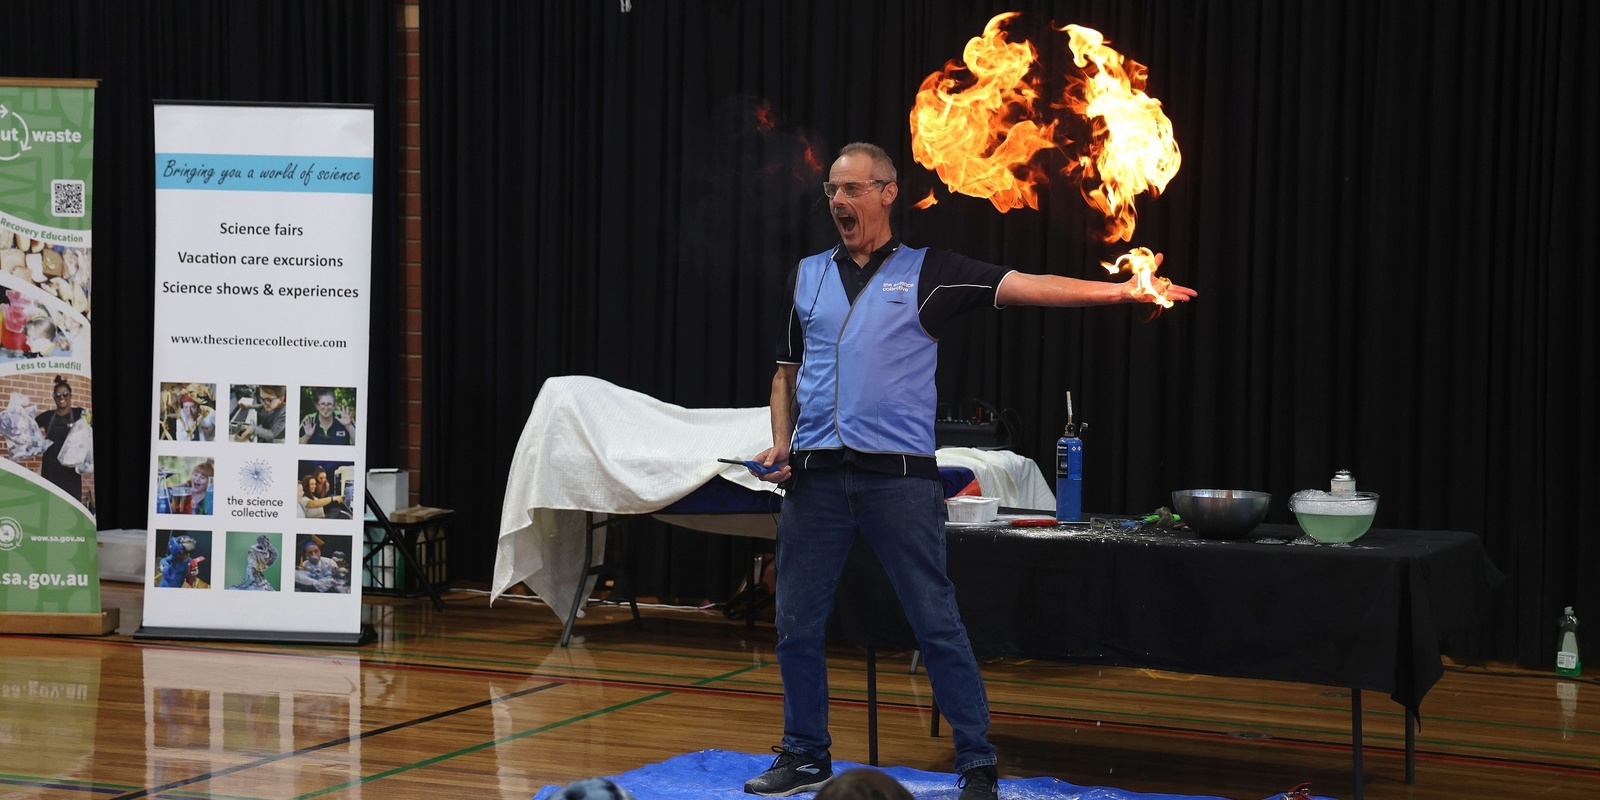 Banner image for Golden Grove Science Fair 10 July Morning Session 9.00am - 12 noon